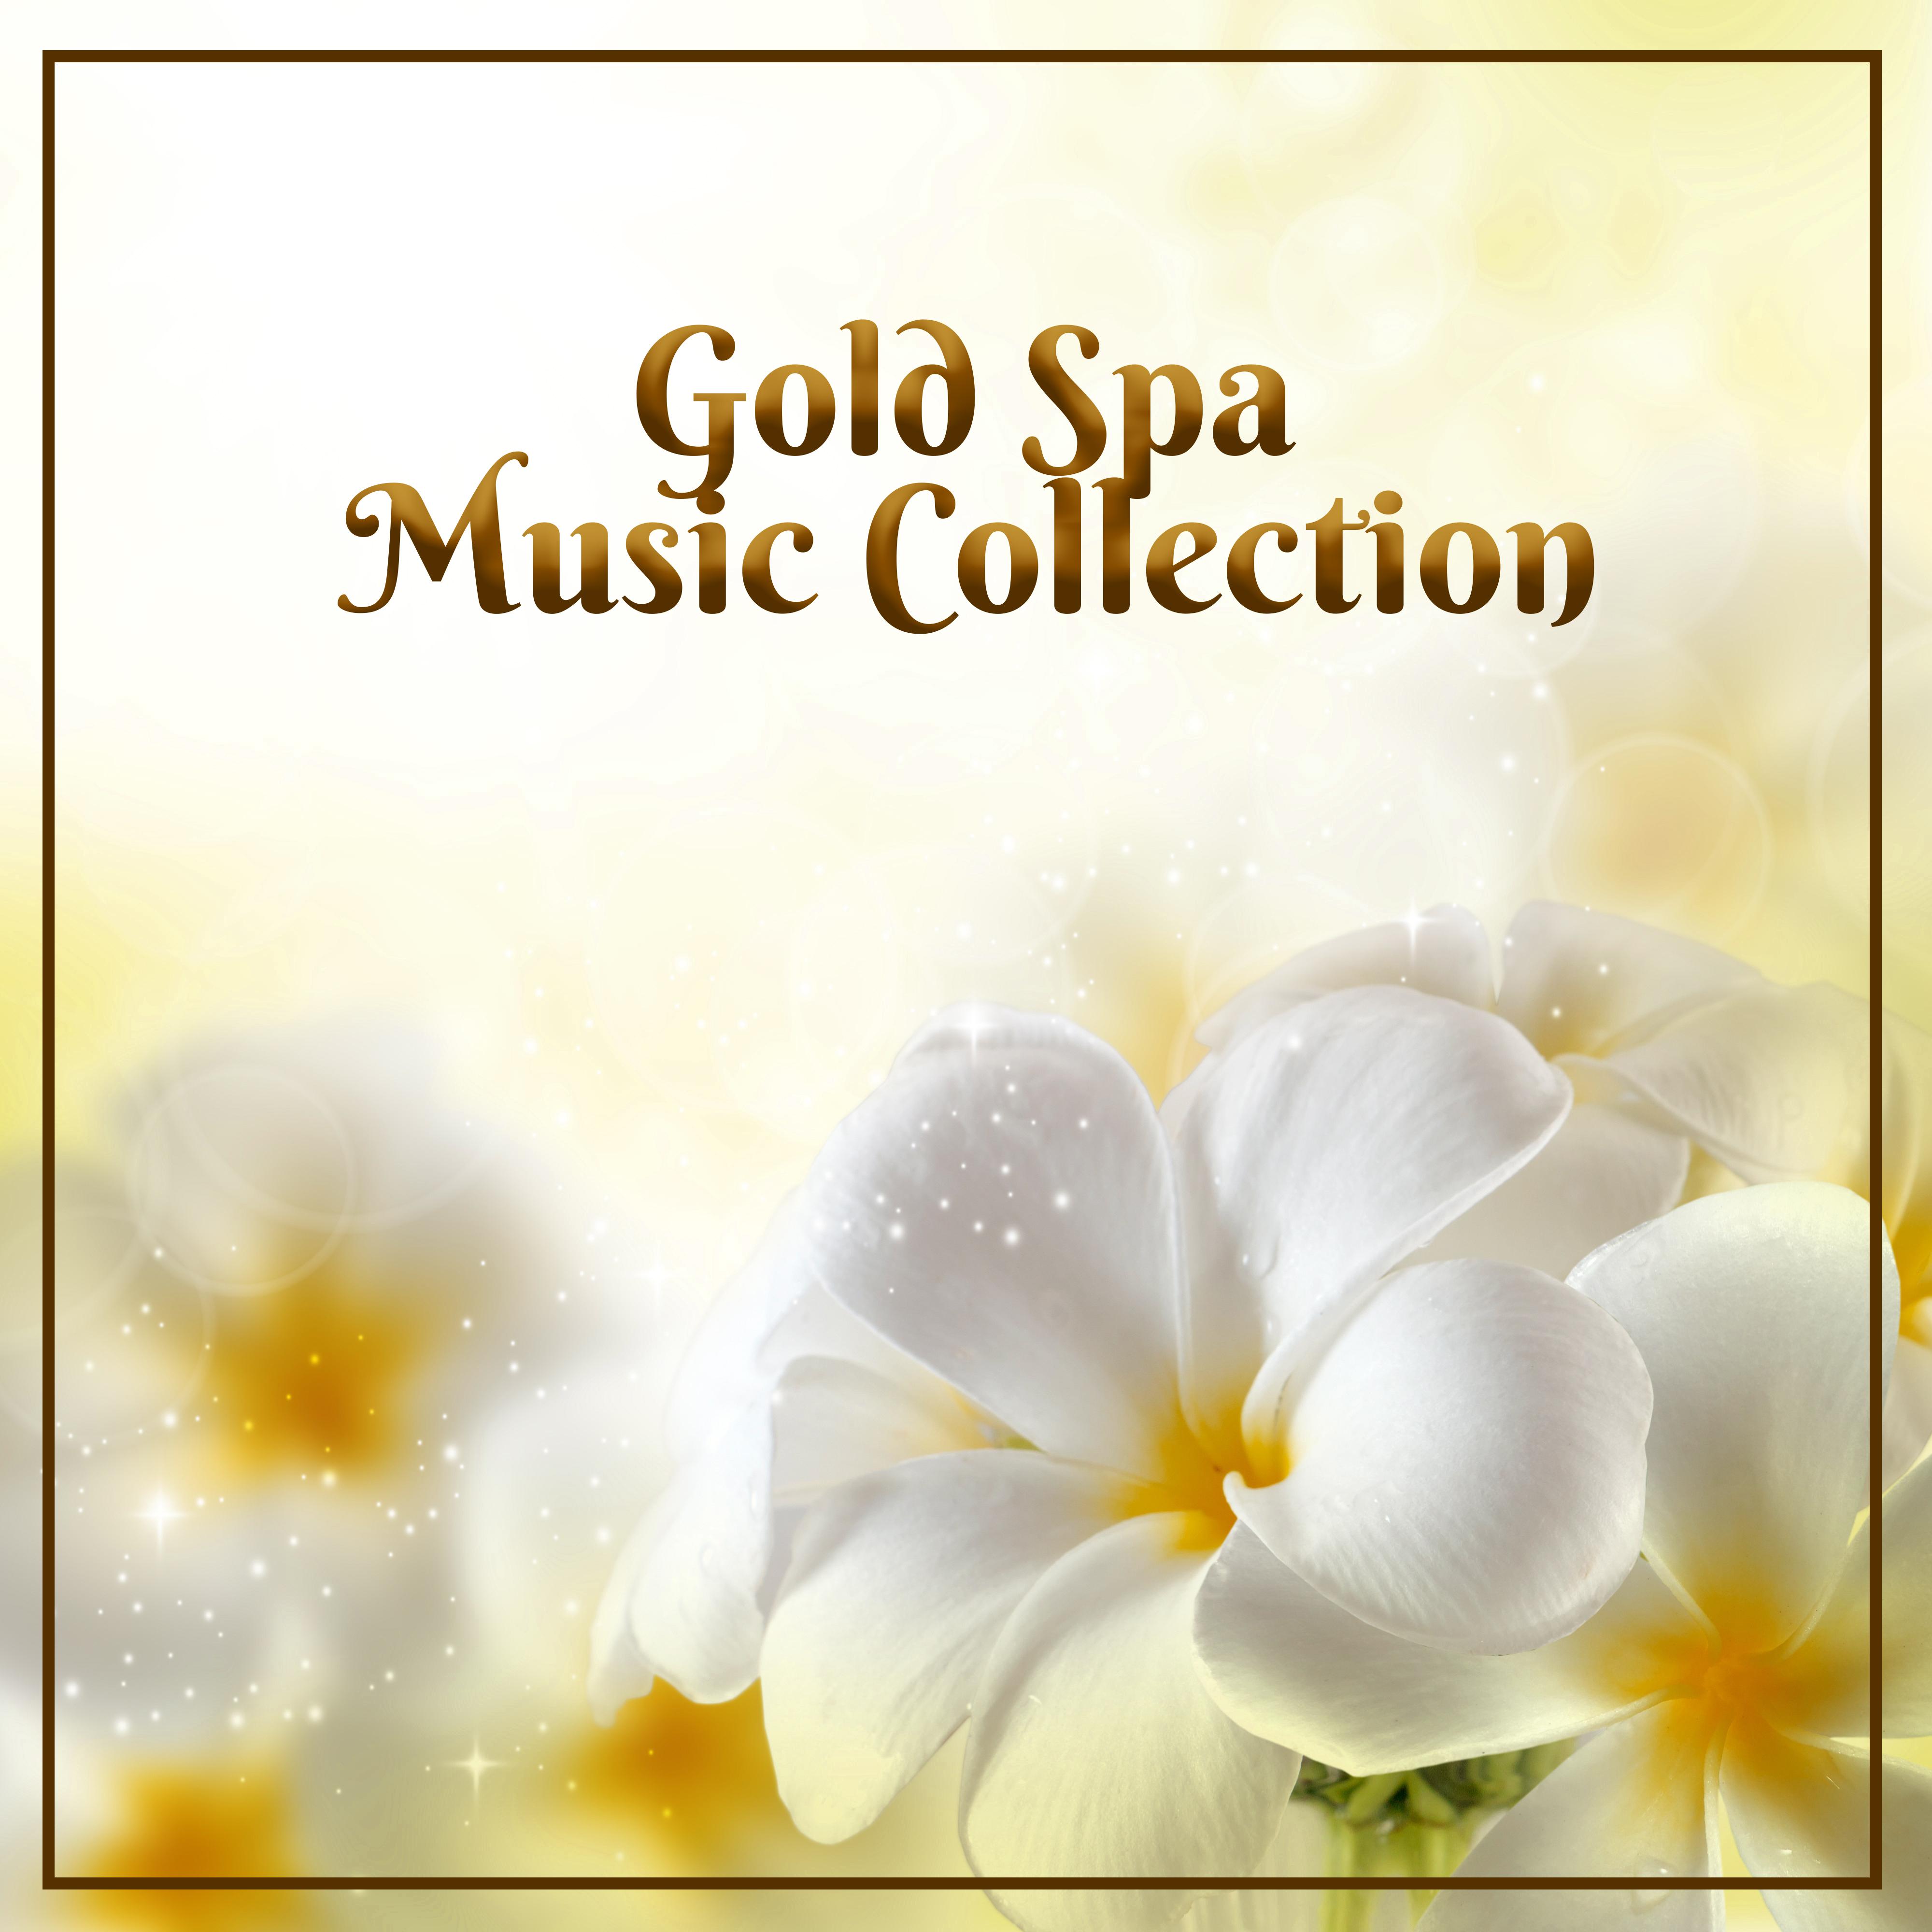 Gold Spa Music Collection  Relaxation Spa, Nature Sounds Collection, Fresh Ne Age Music 2017